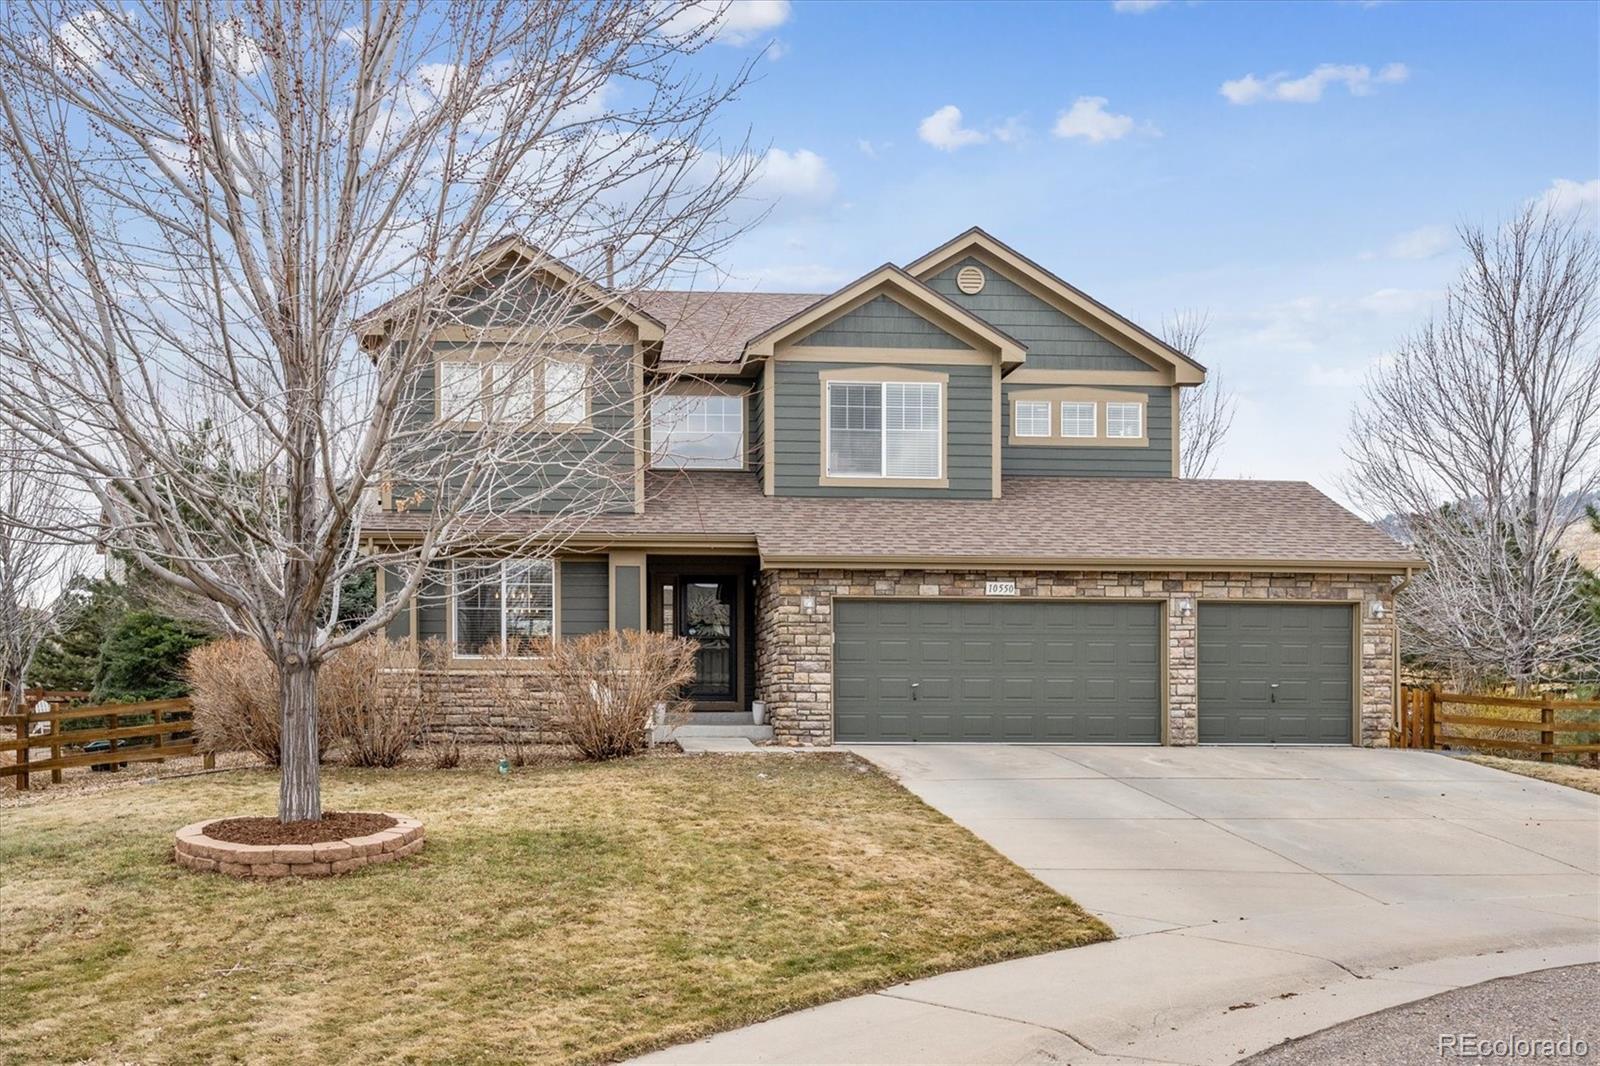 10550  paint place, Littleton sold home. Closed on 2024-04-17 for $805,000.